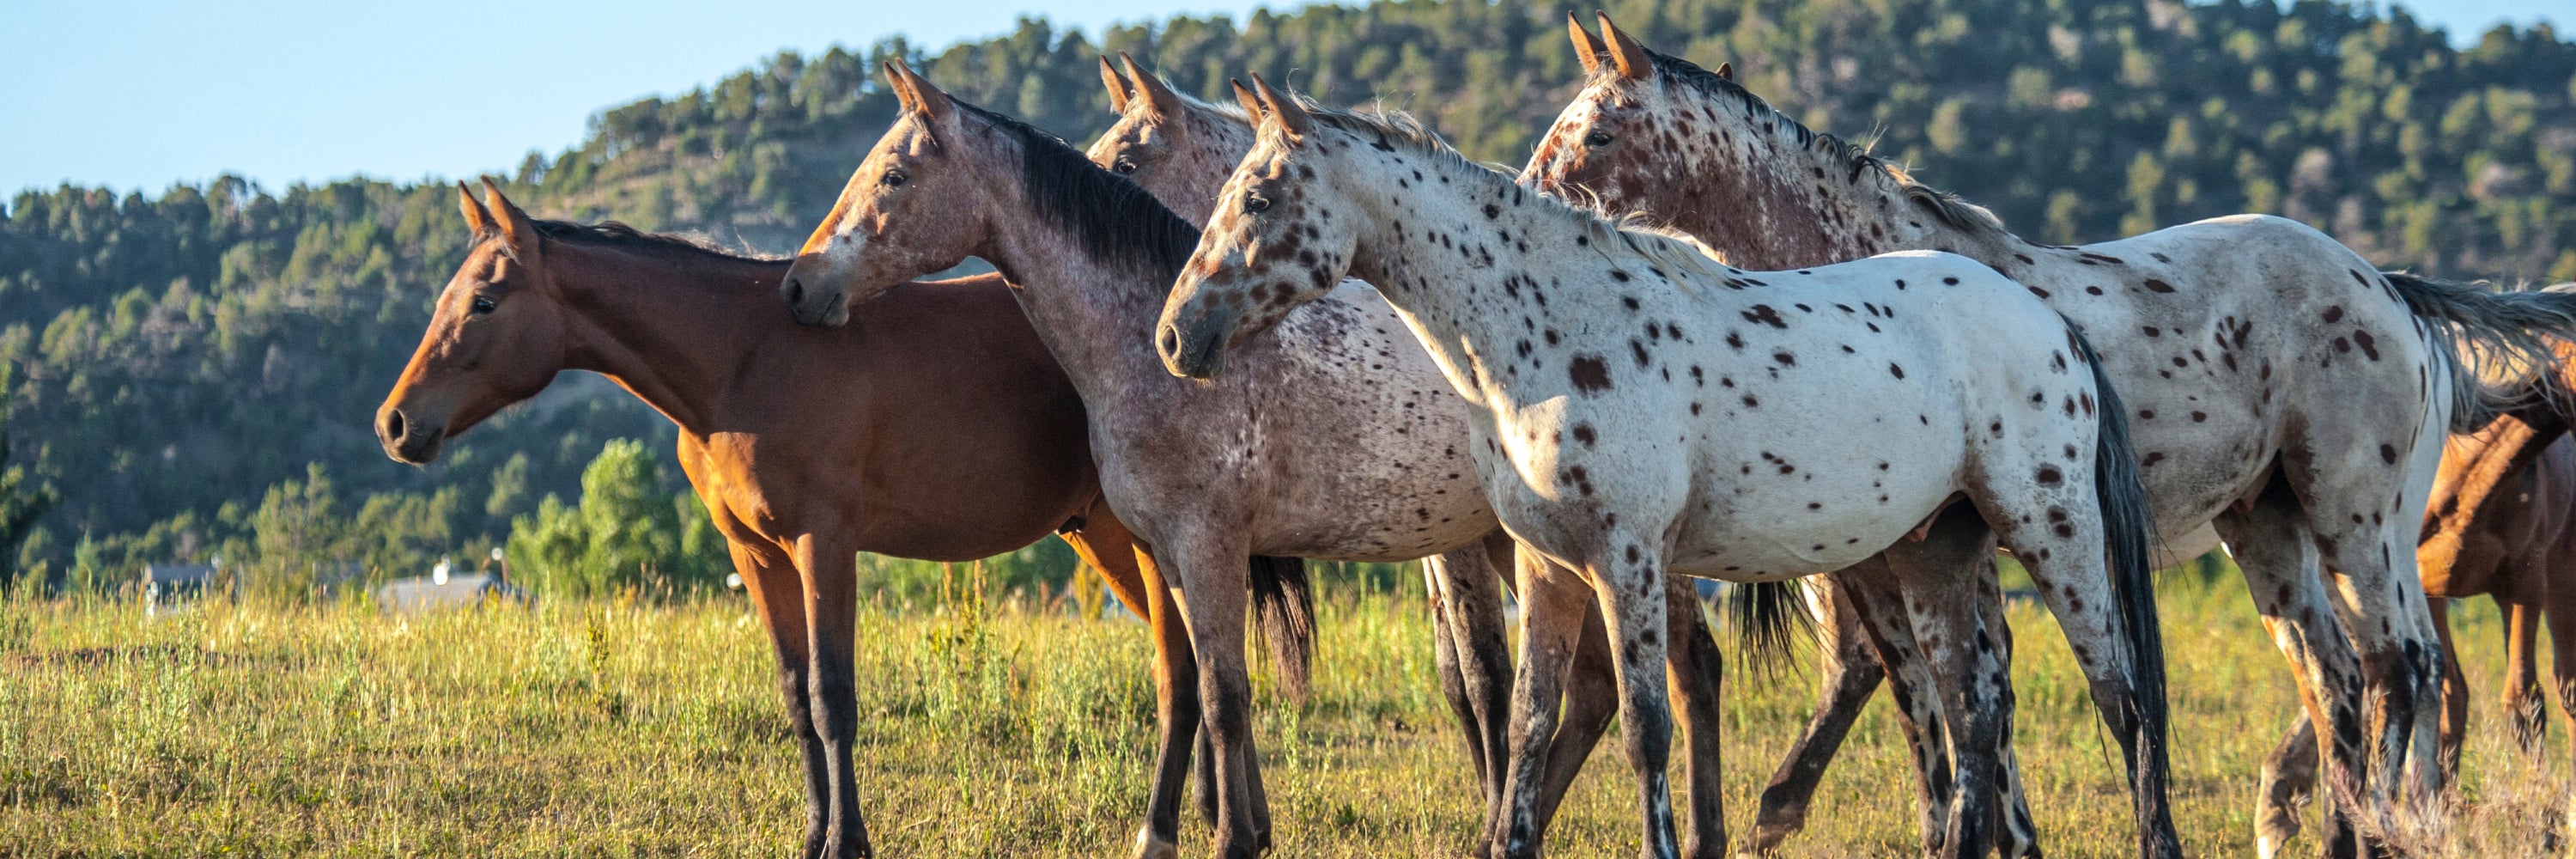 Everything You Want to Know About Dappled Horses